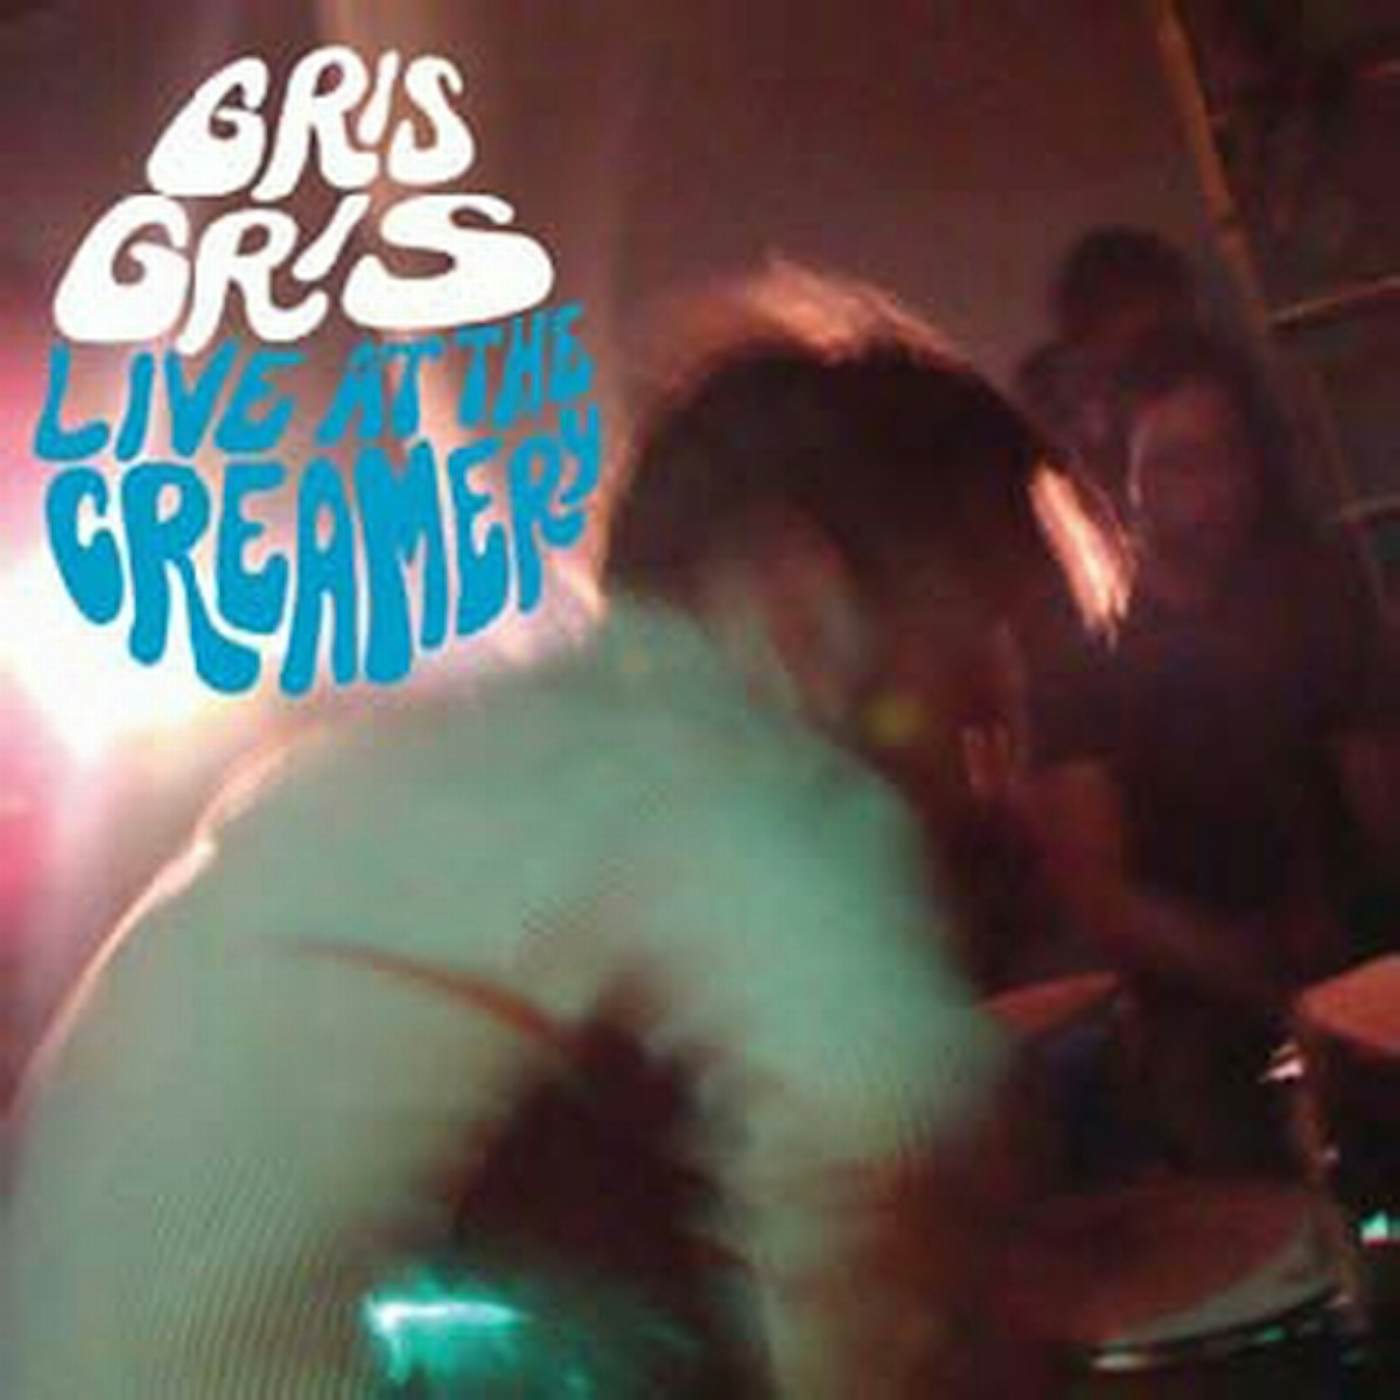 Gris Gris Live At The Creamery Vinyl Record